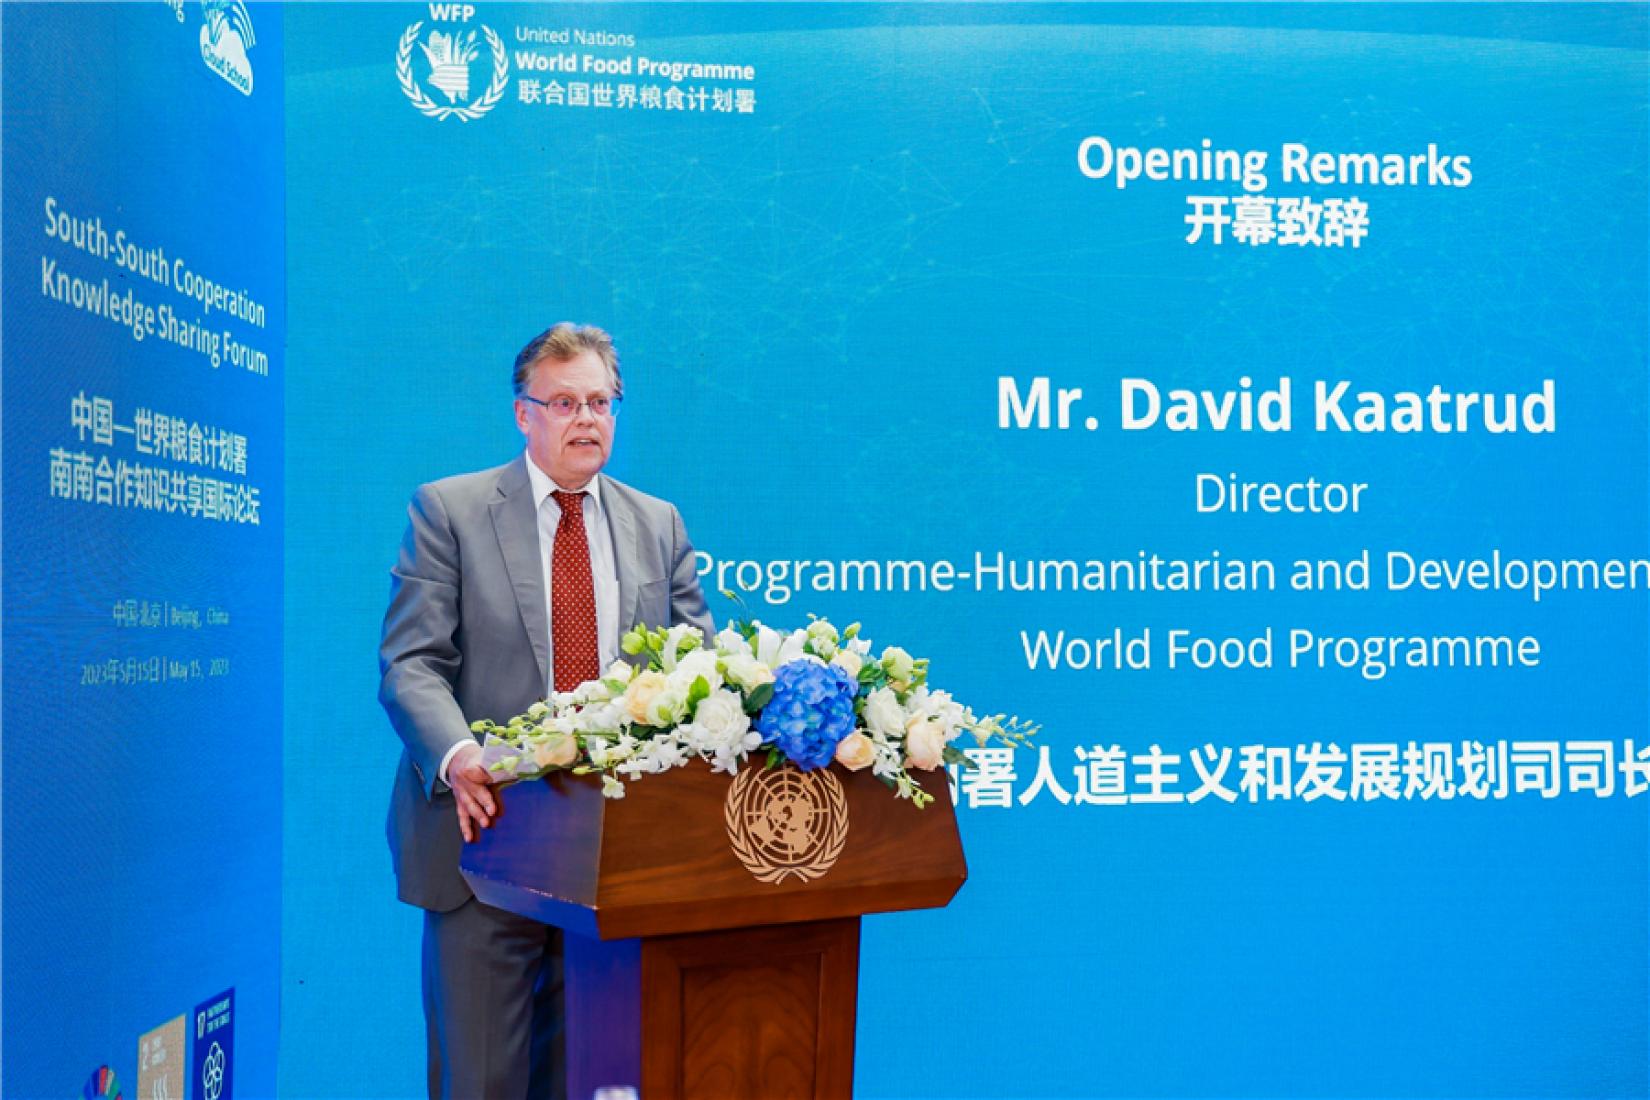 David Kaatrud, WFP Programme Director of Humanitarian and Development Division, delivers a speech at the South-South Cooperation Knowledge Sharing Forum